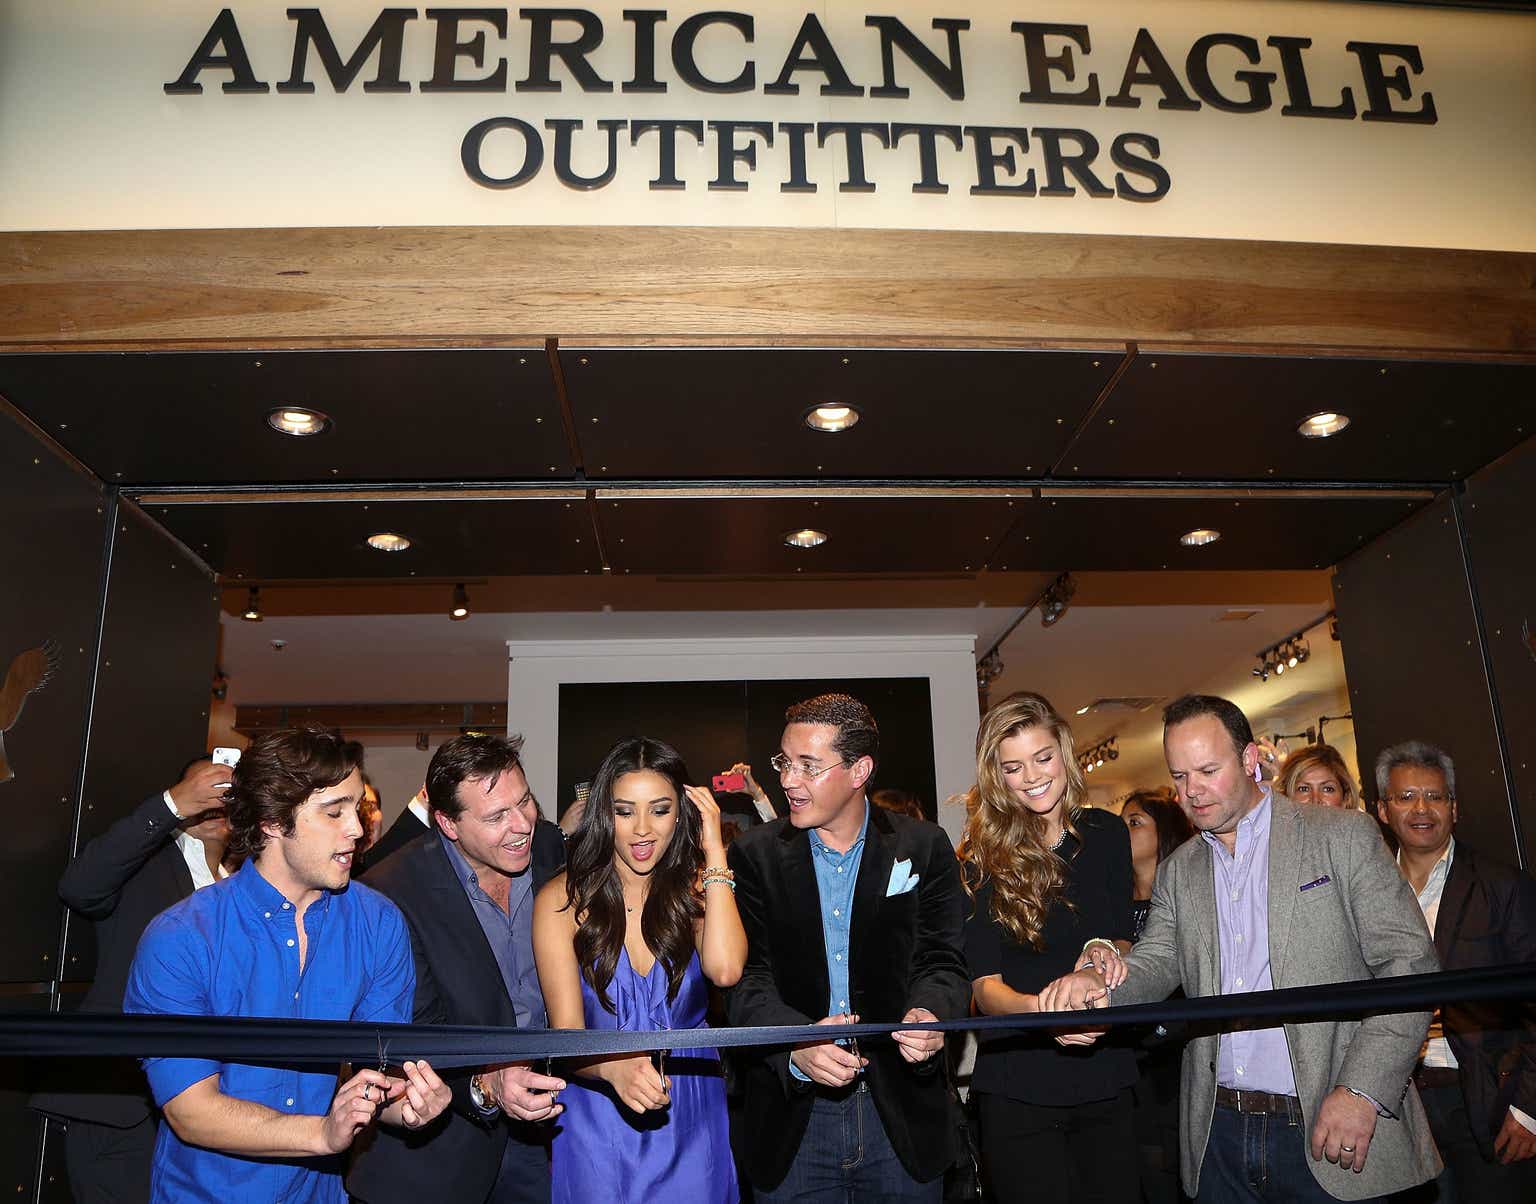 American Eagle New Store Unsubscribed Is 'Slow Retail